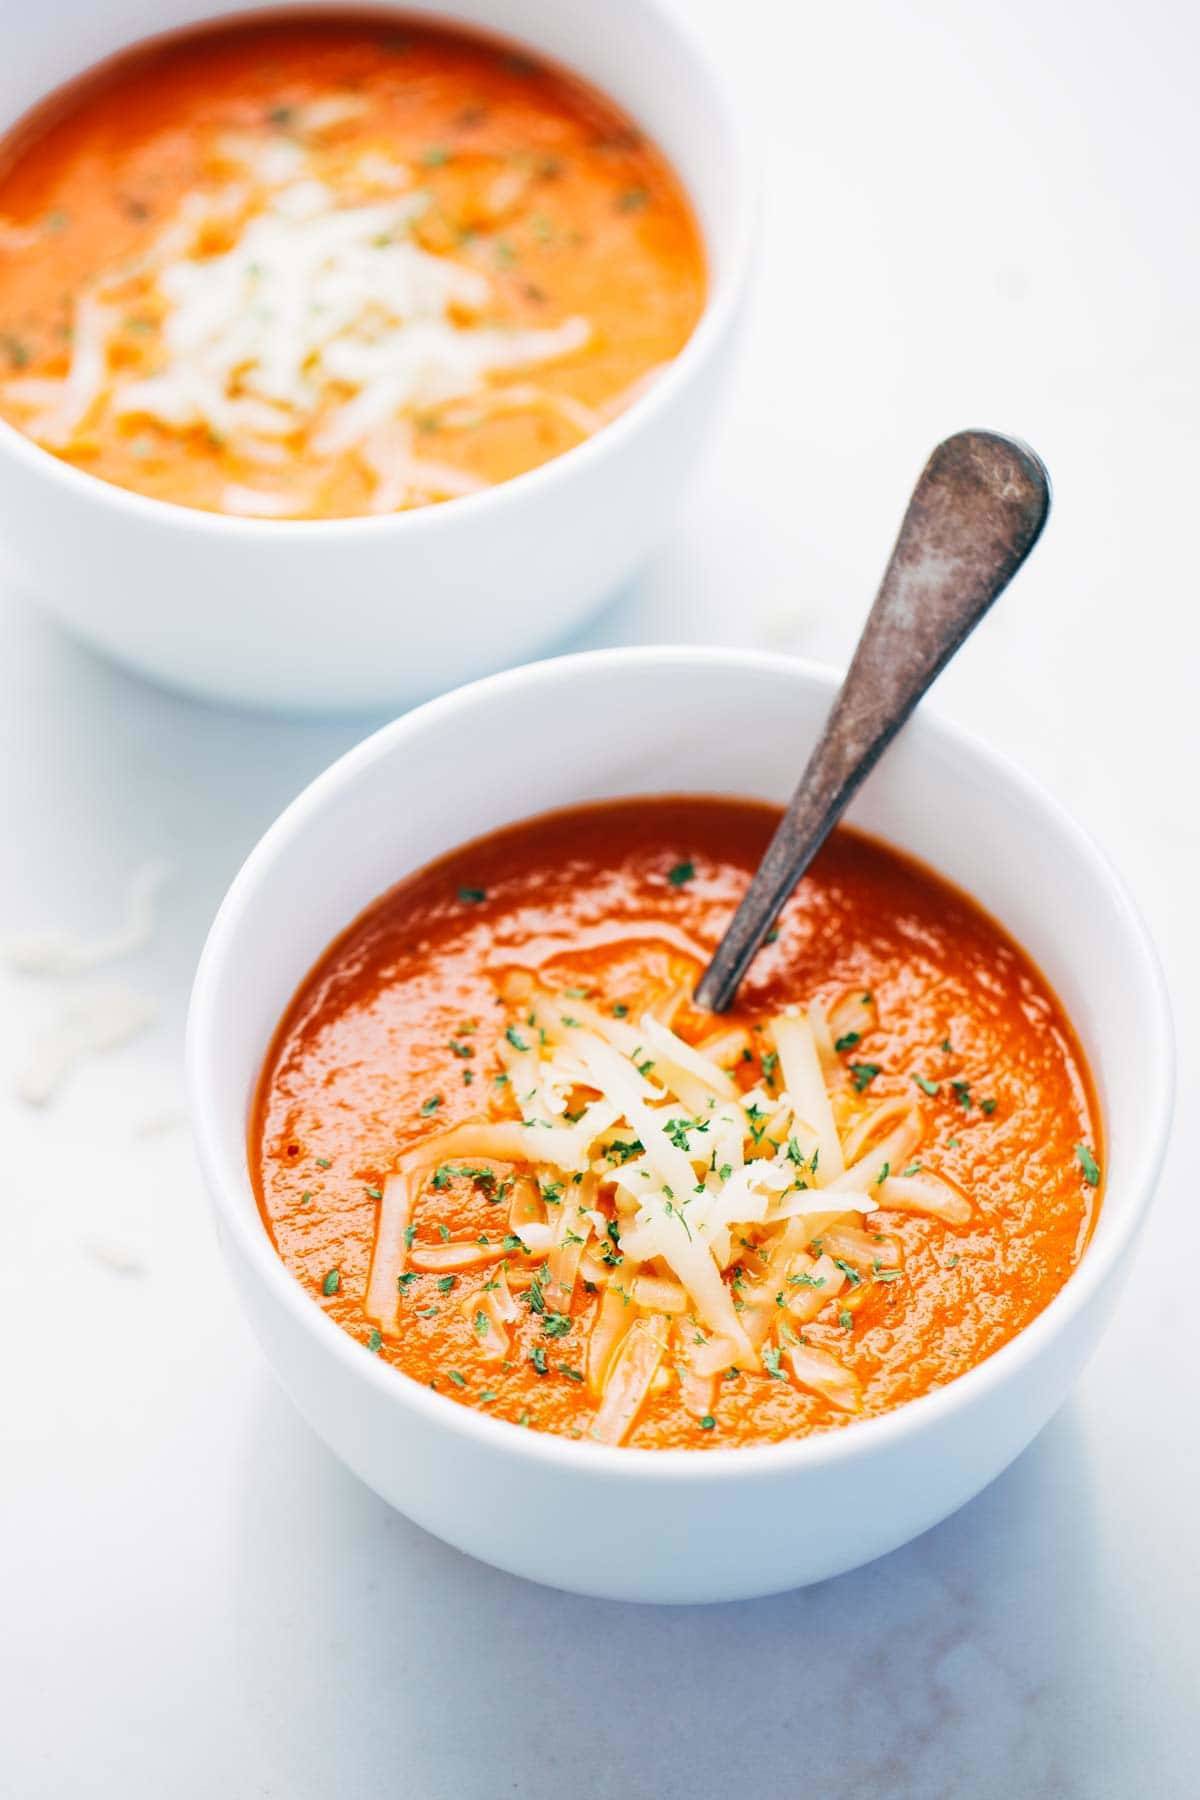 Simple Homemade Tomato Soup with carrots, onions, garlic, tomatoes, broth, and bacon for deliciously rich flavor. Extremely easy to make! | pinchfoyum.com